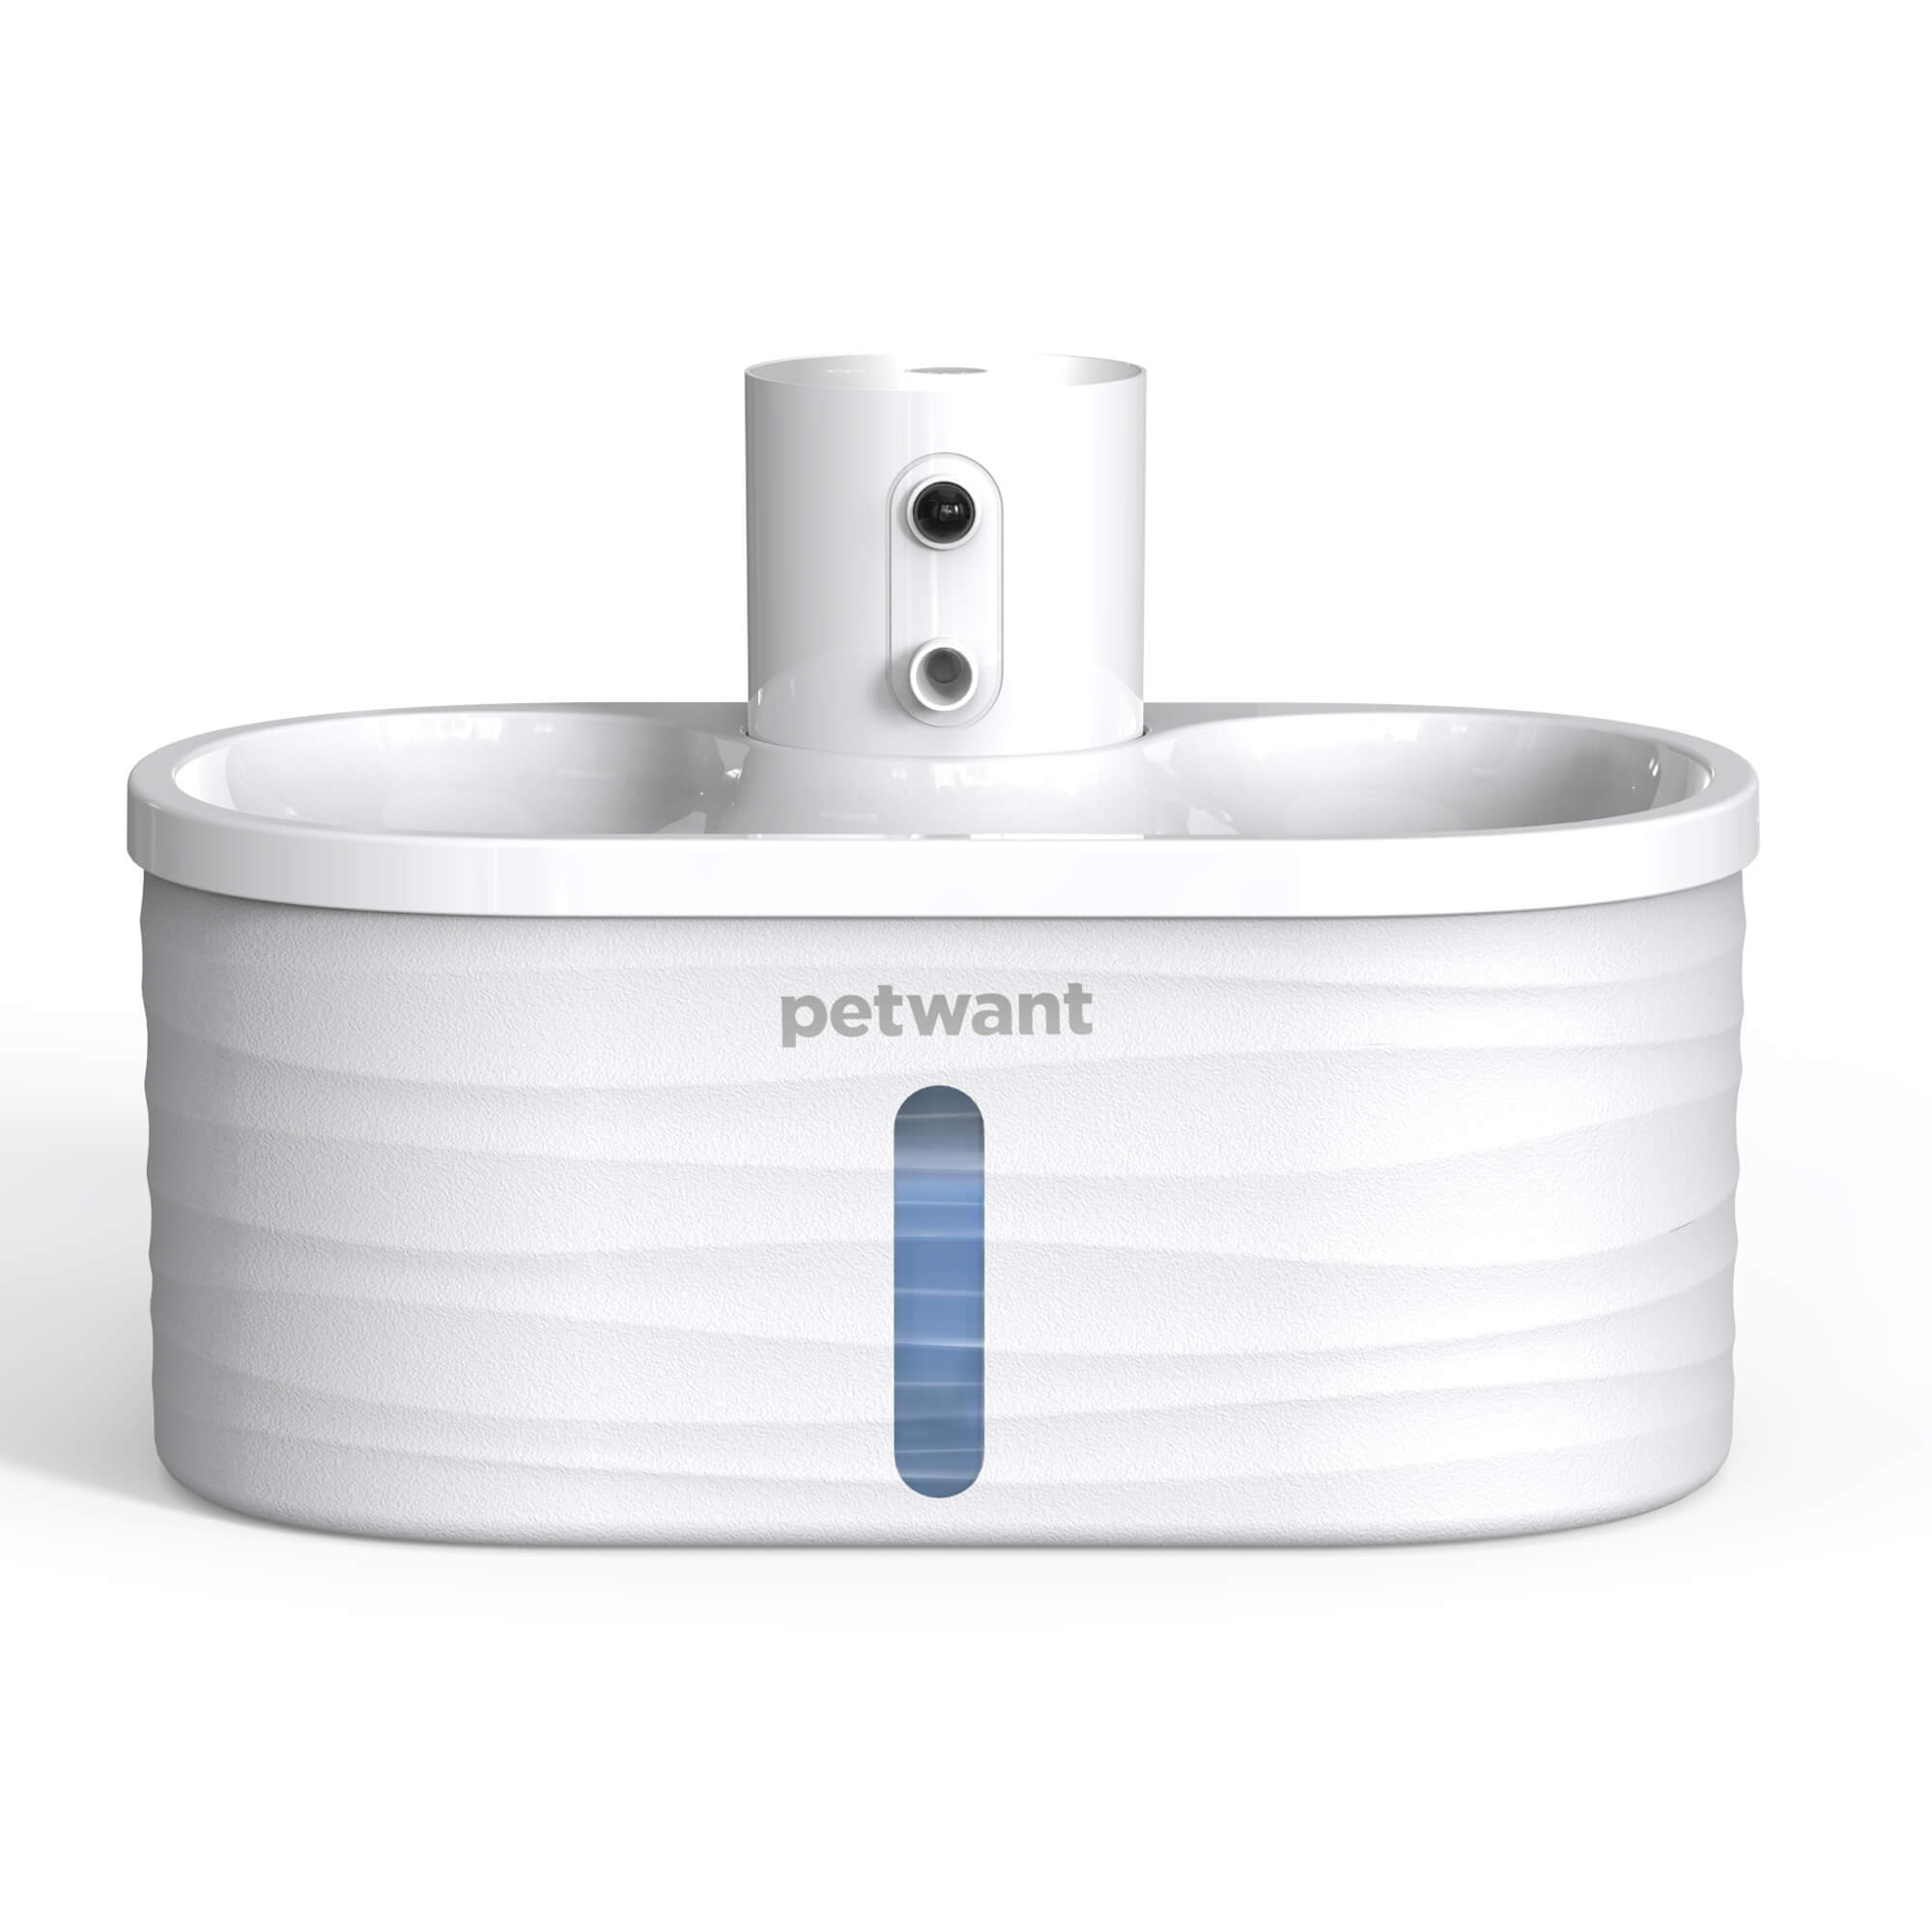 Petwant New Design 2.5L Wireless Rechargeable Battery Operated Cat Water Fountain Infrared Sensor 3 Flow Modes BPA-Free Quiet Pump Pet Water Dispenser for Pets Inside or Outdoor